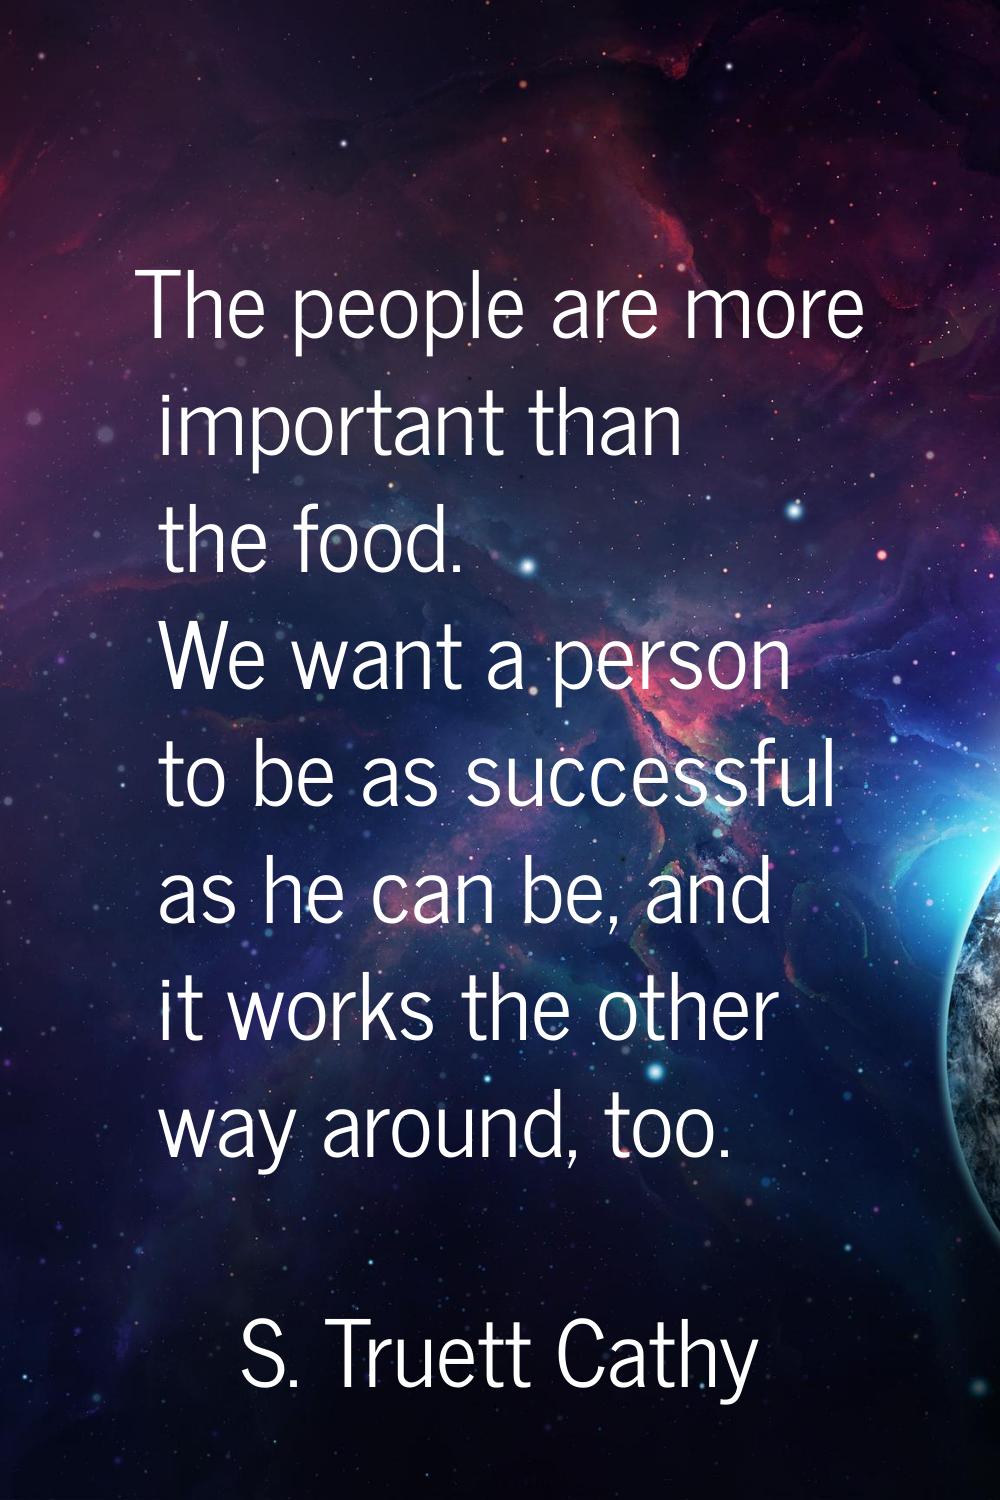 The people are more important than the food. We want a person to be as successful as he can be, and